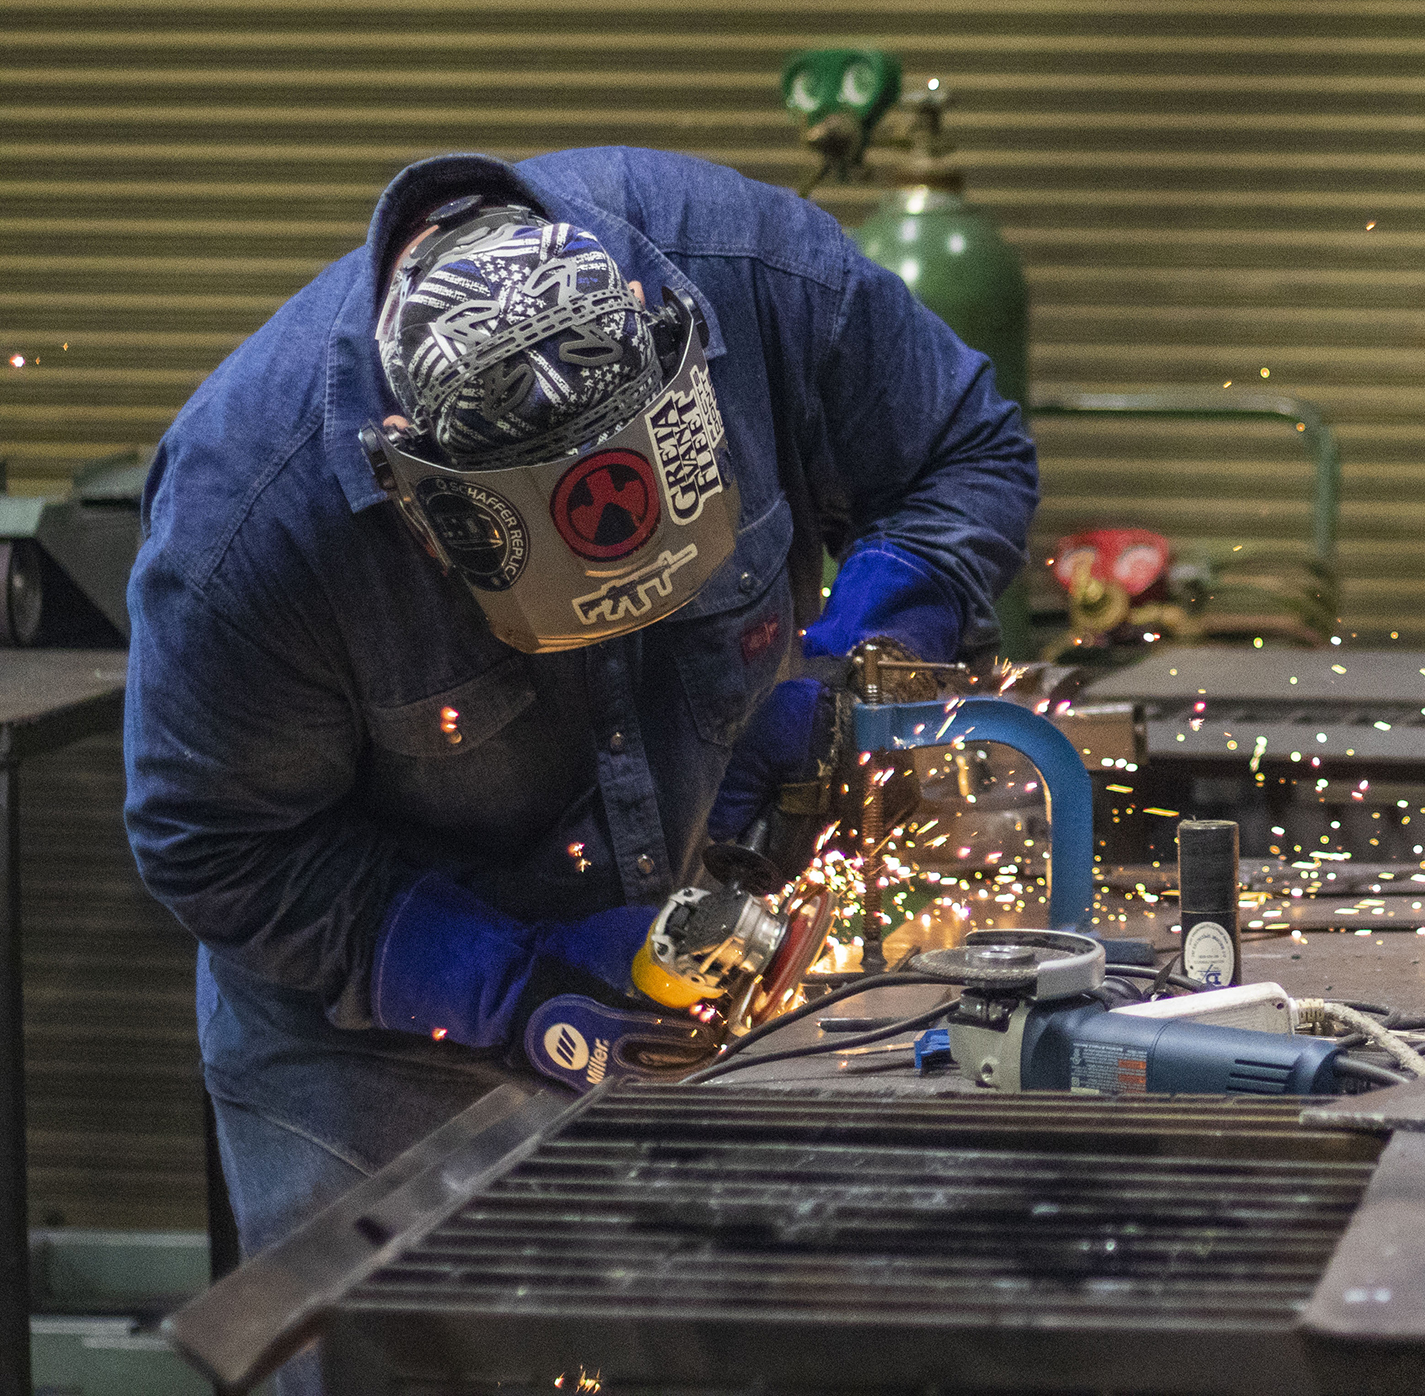 In the Intro to Pipe class, offered through South’s welding program, students work on projects and familiarize themselves with the equipment.